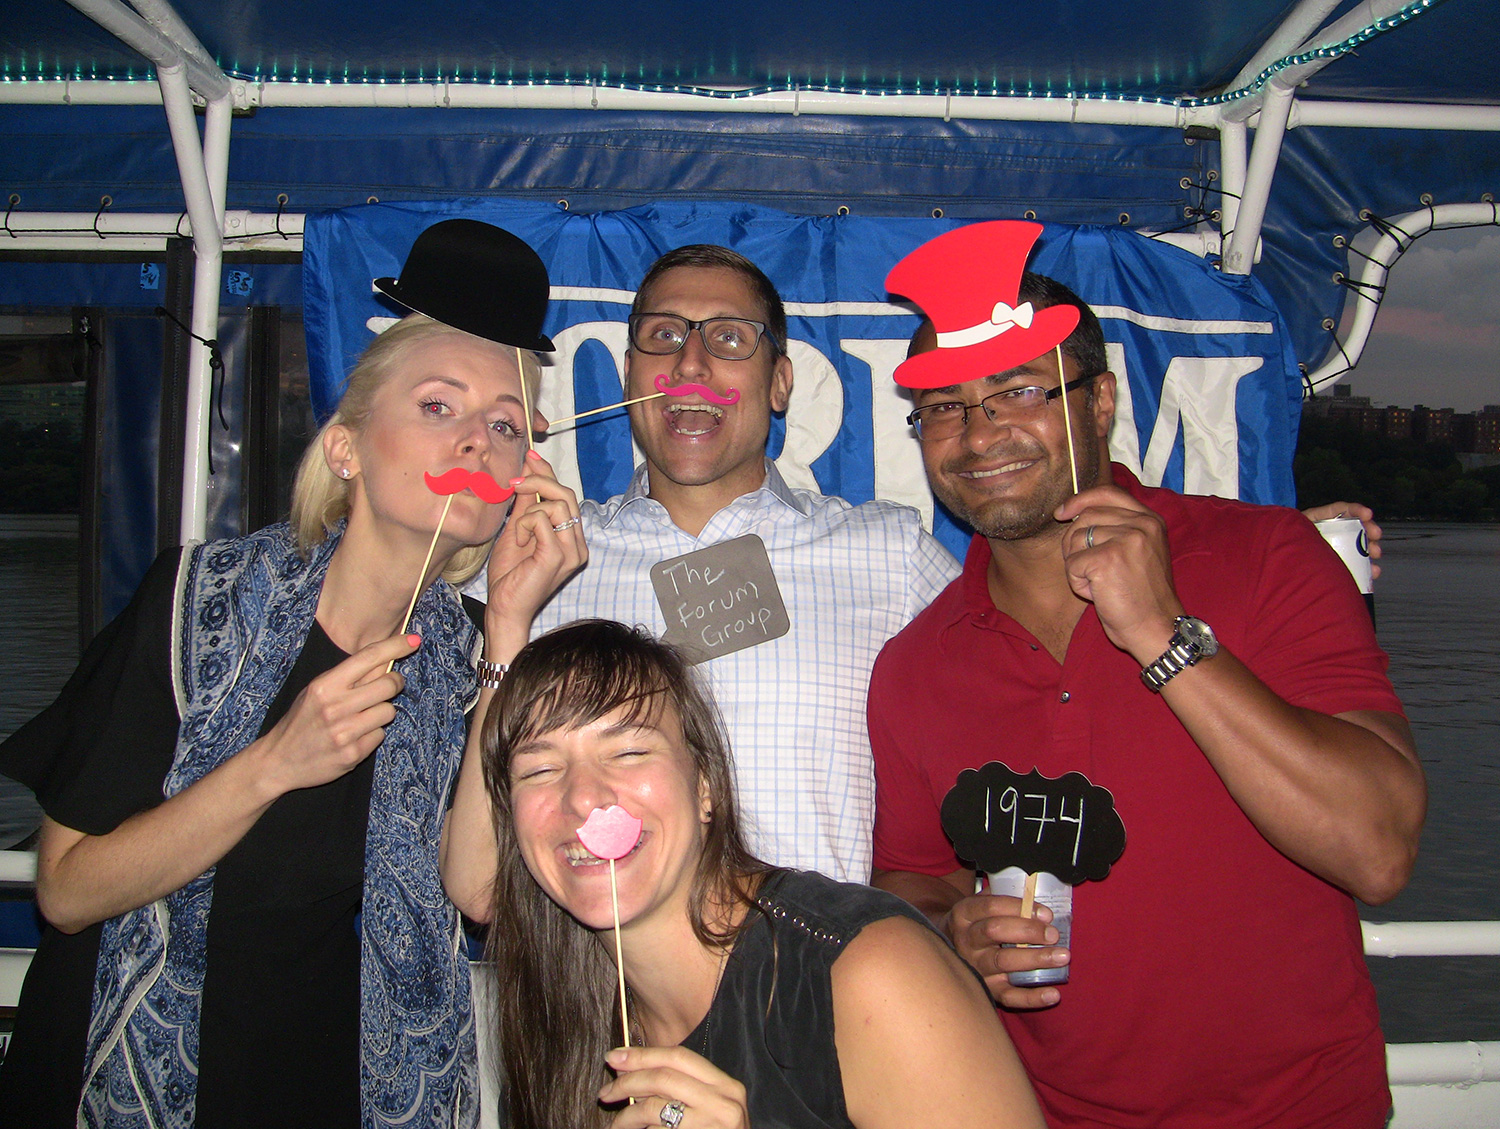 Photo: The Forum Group staff with photo booth props.